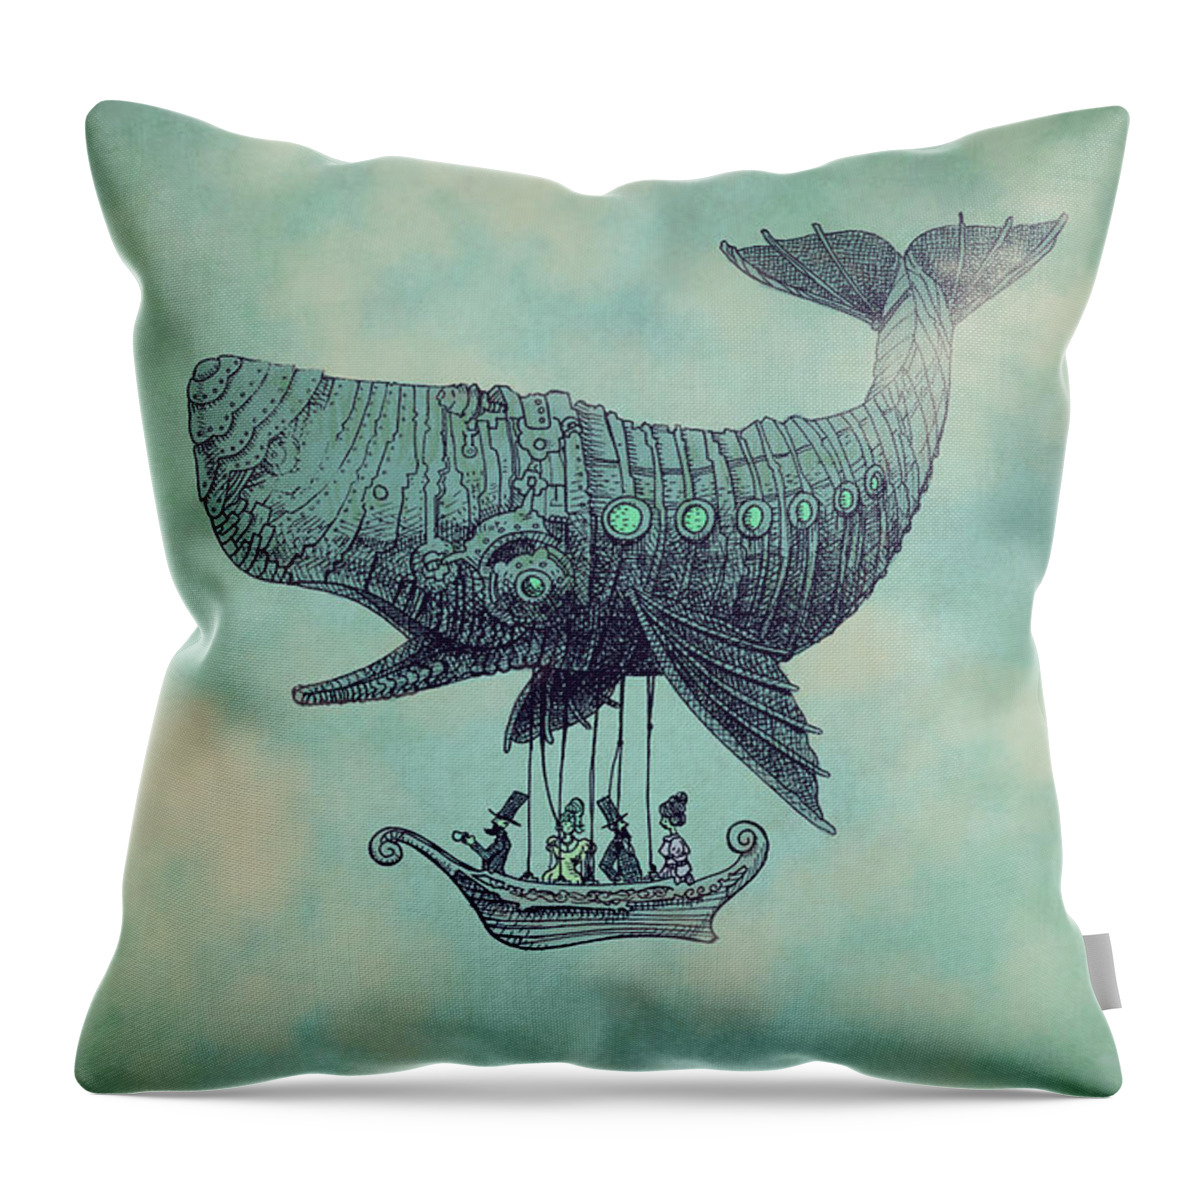 Whale Throw Pillow featuring the drawing Tea at Two Thousand Feet by Eric Fan